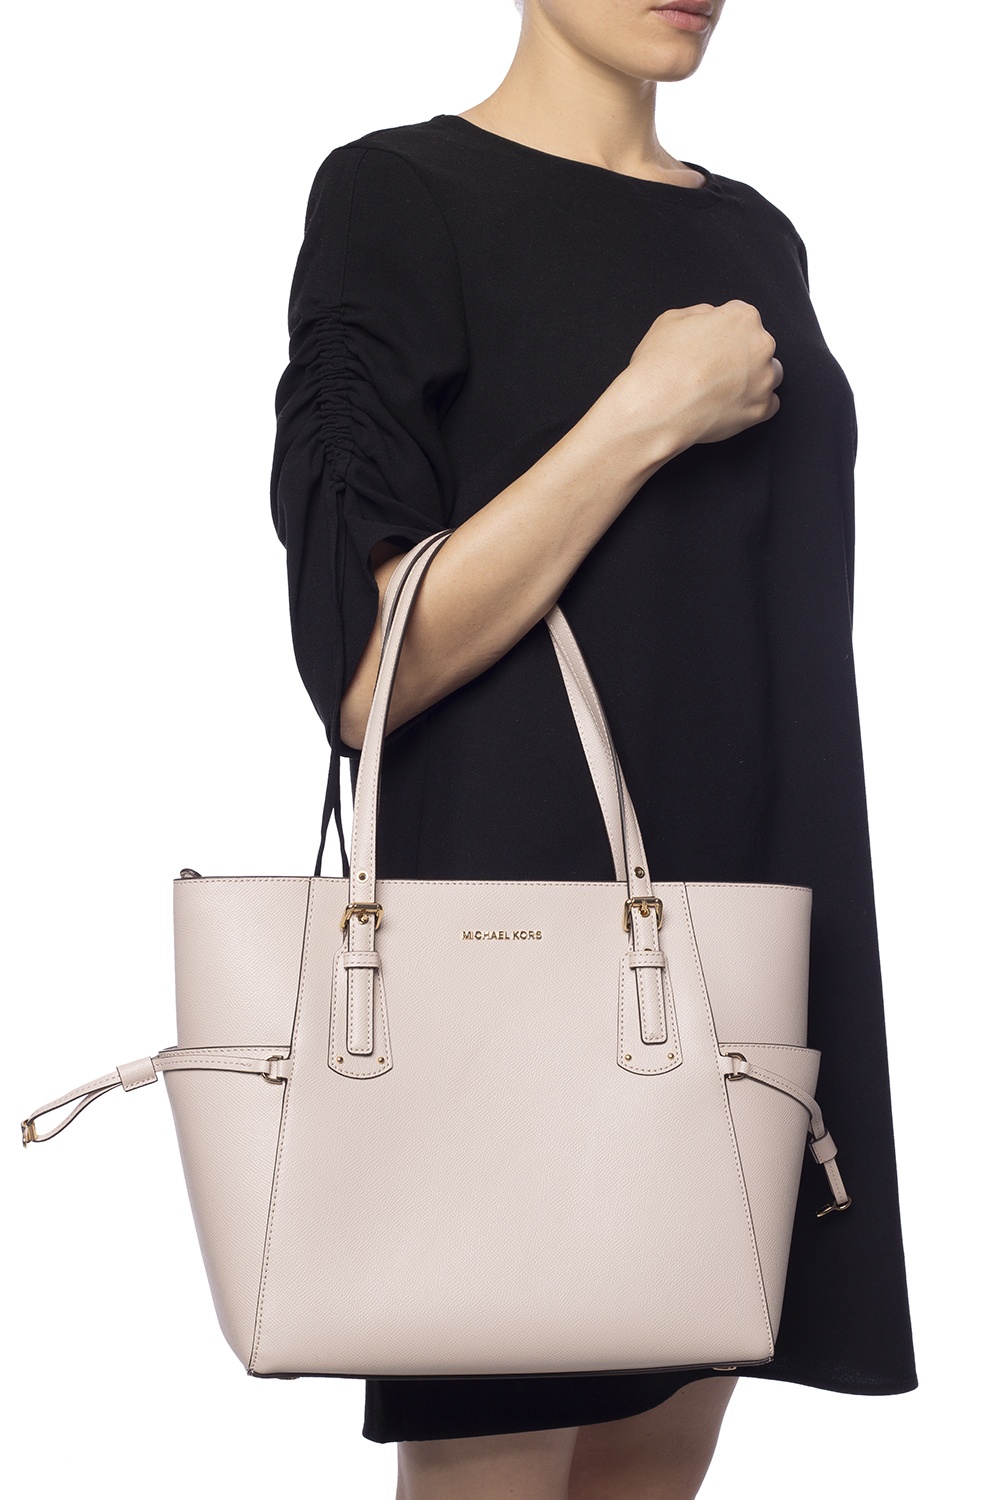 Michael Kors Voyager Small Saffiano Leather Tote Bag